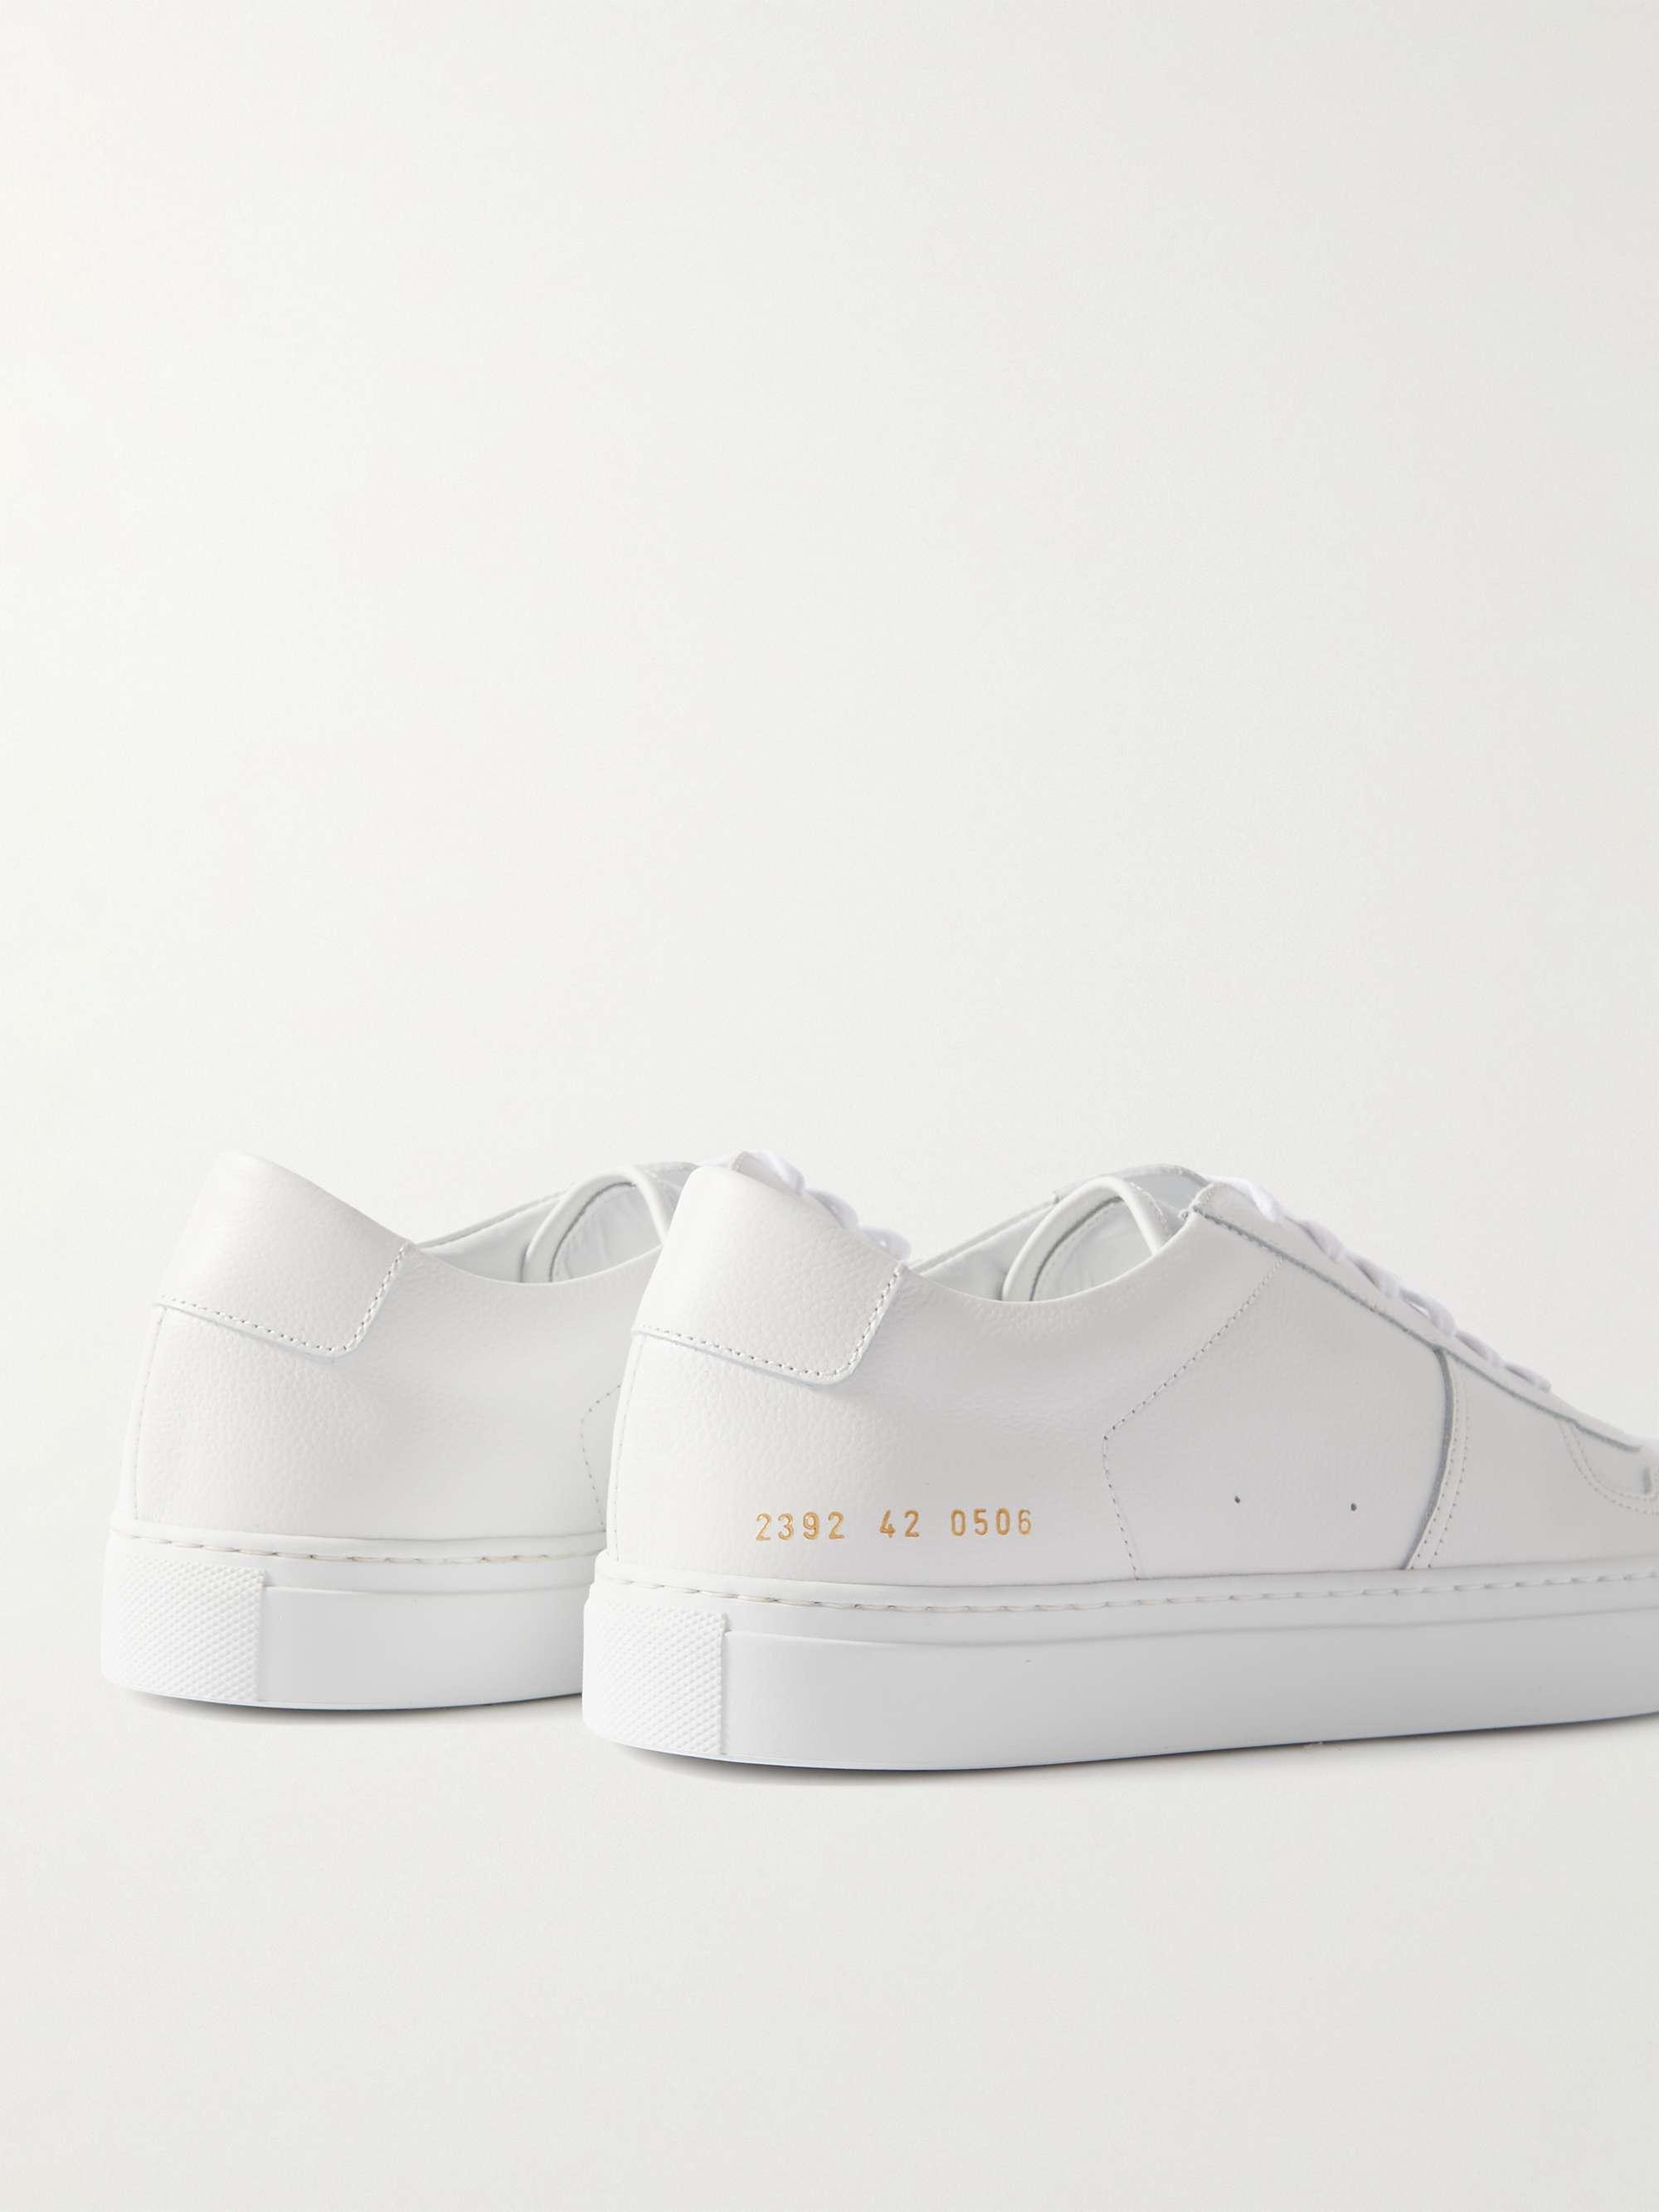 COMMON PROJECTS BBall Duo Full-Grain Leather Sneakers for Men | MR PORTER